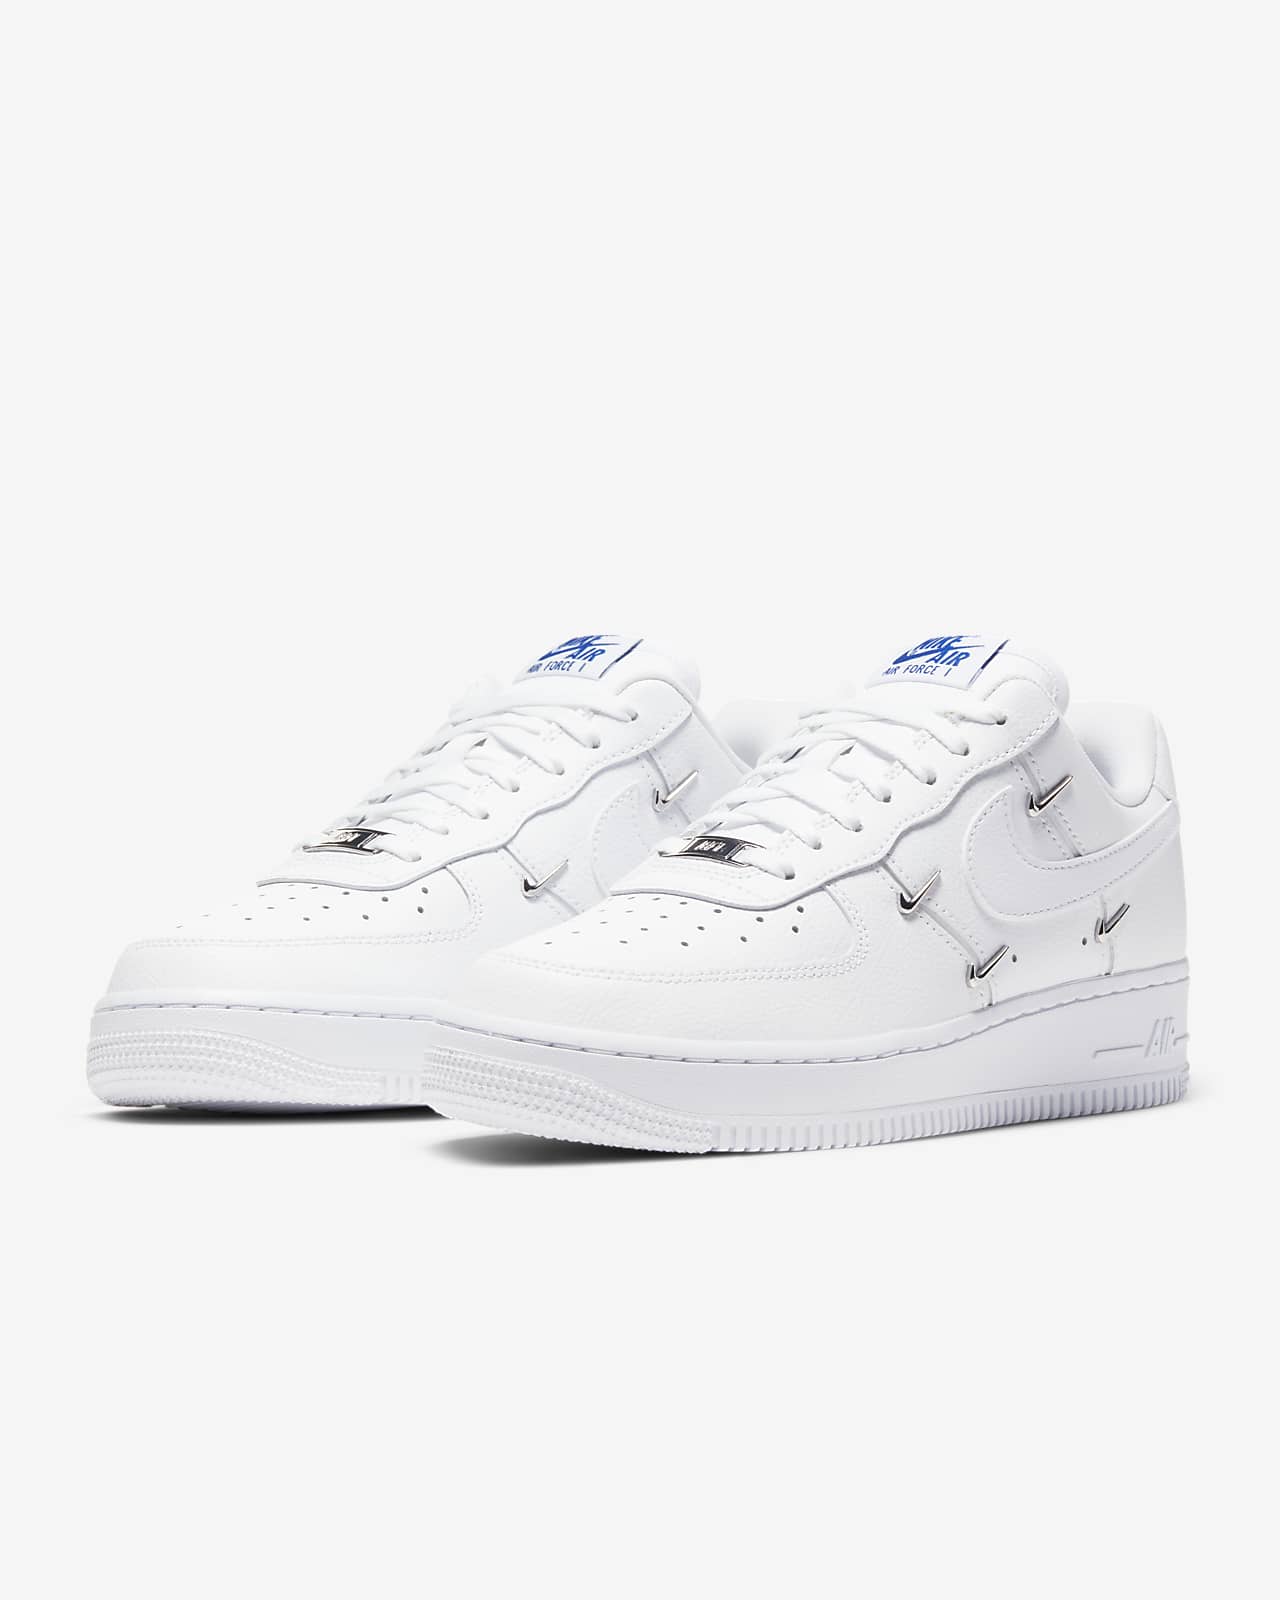 Chaussure Nike Air Force 1 '07 LX pour Femme